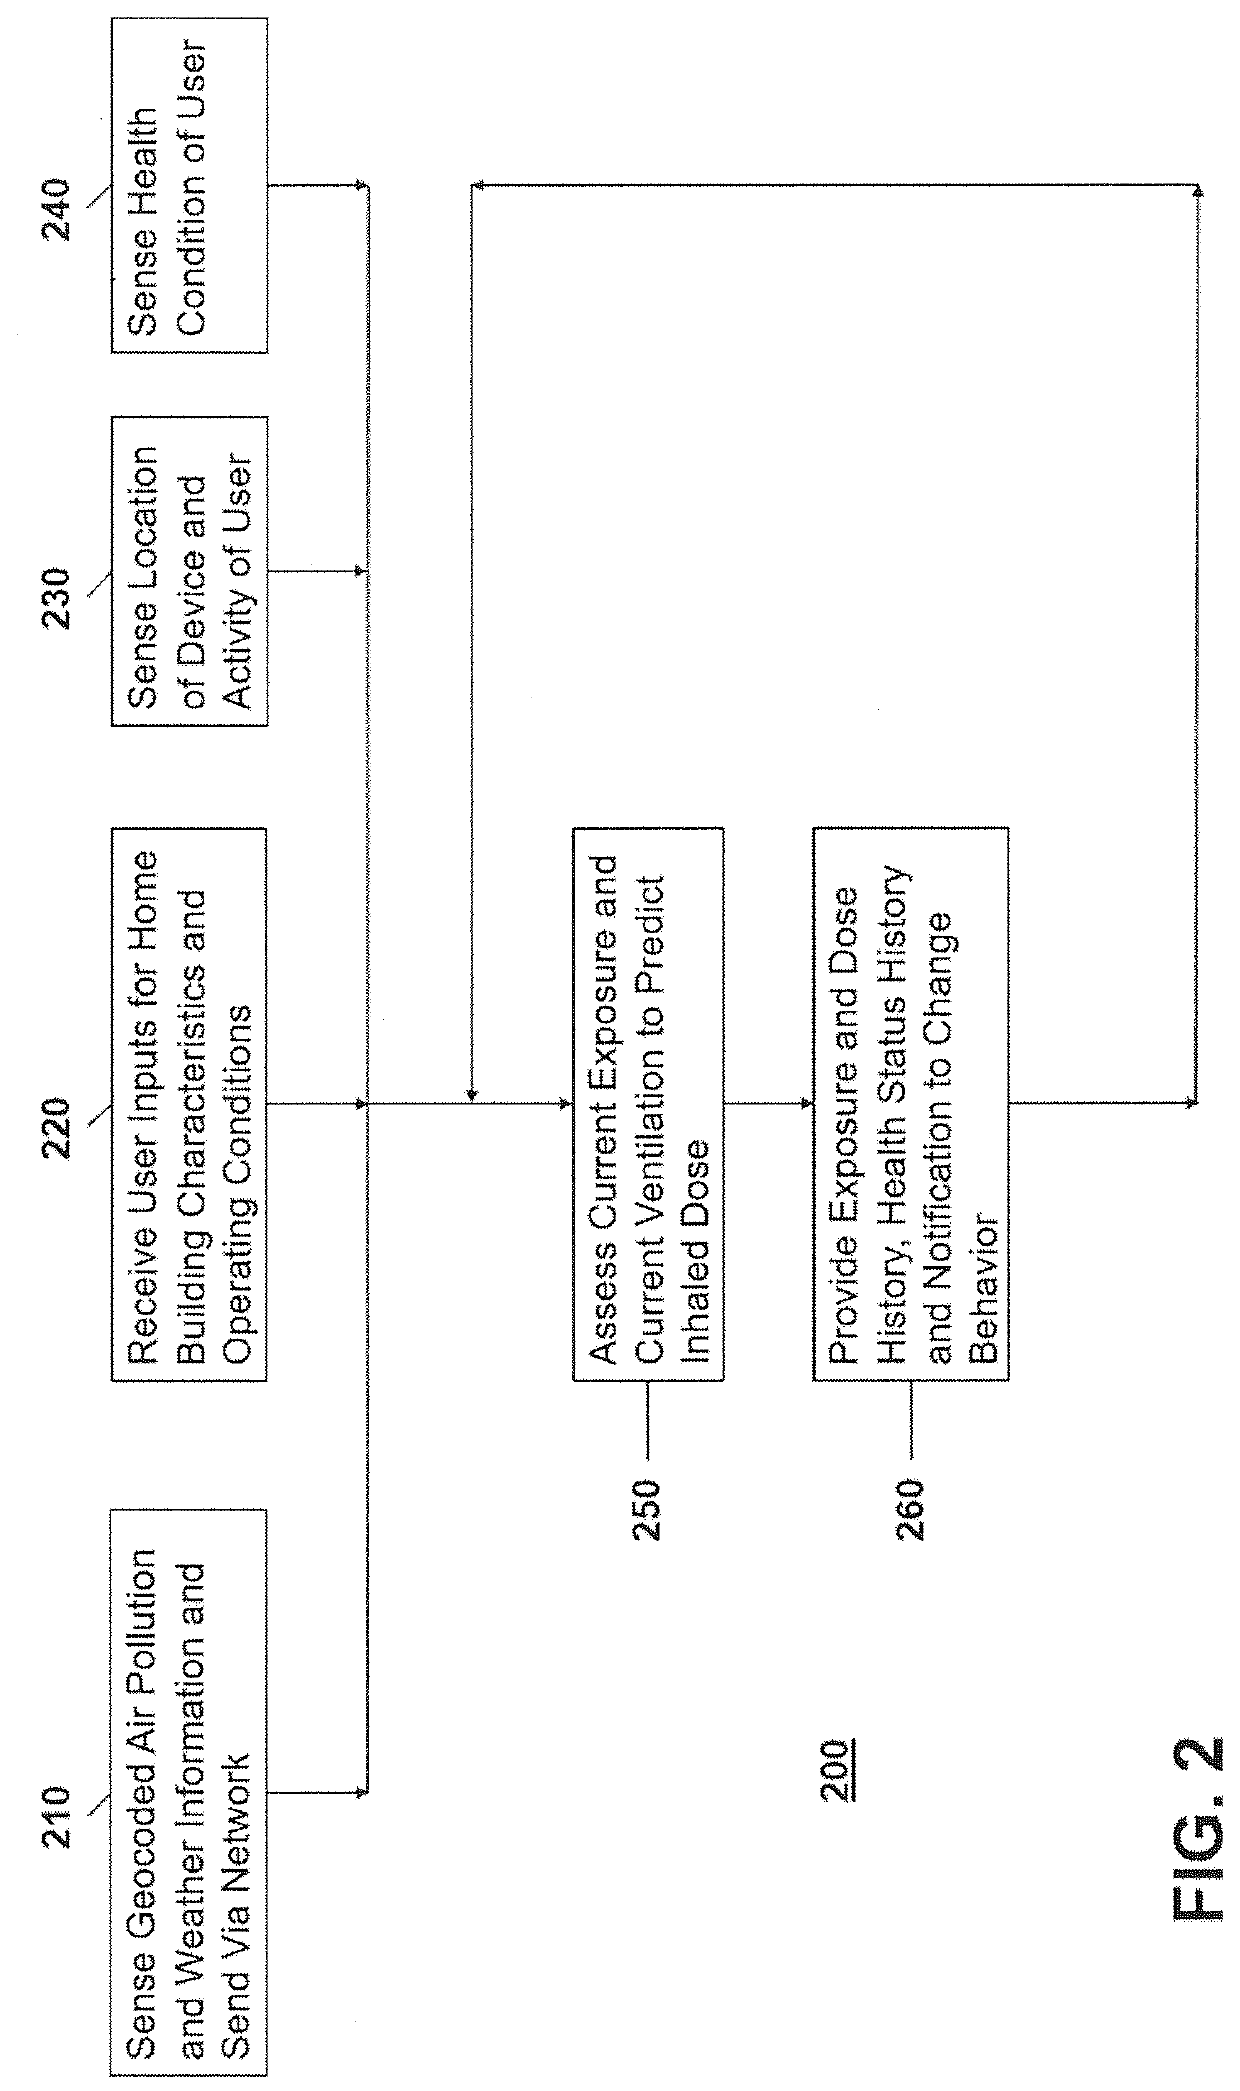 System and method for assessment and management of air pollution exposures using personal devices